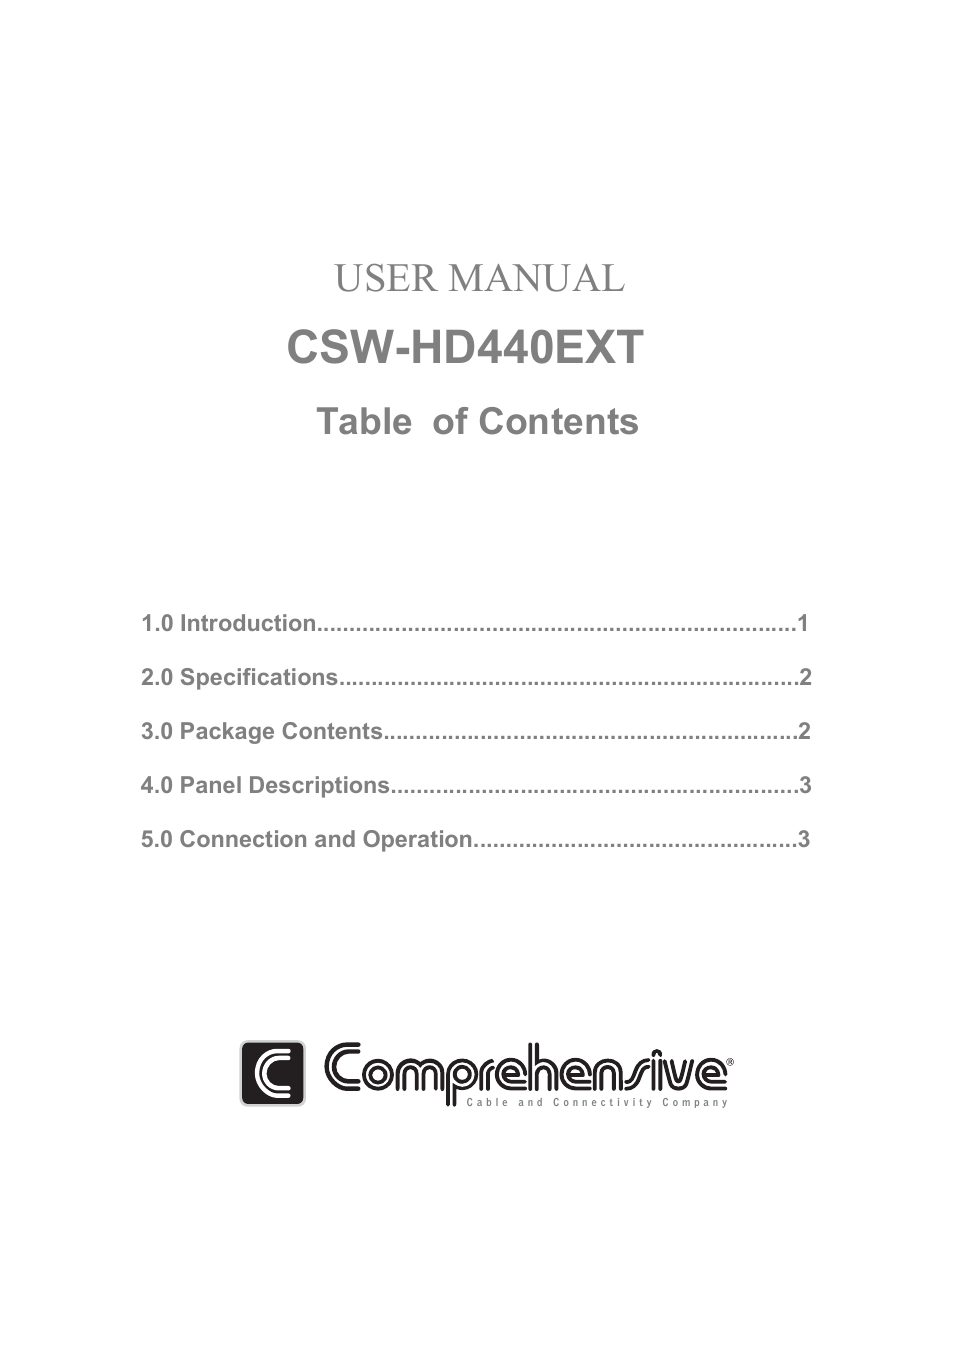 CSW-HD440EXT